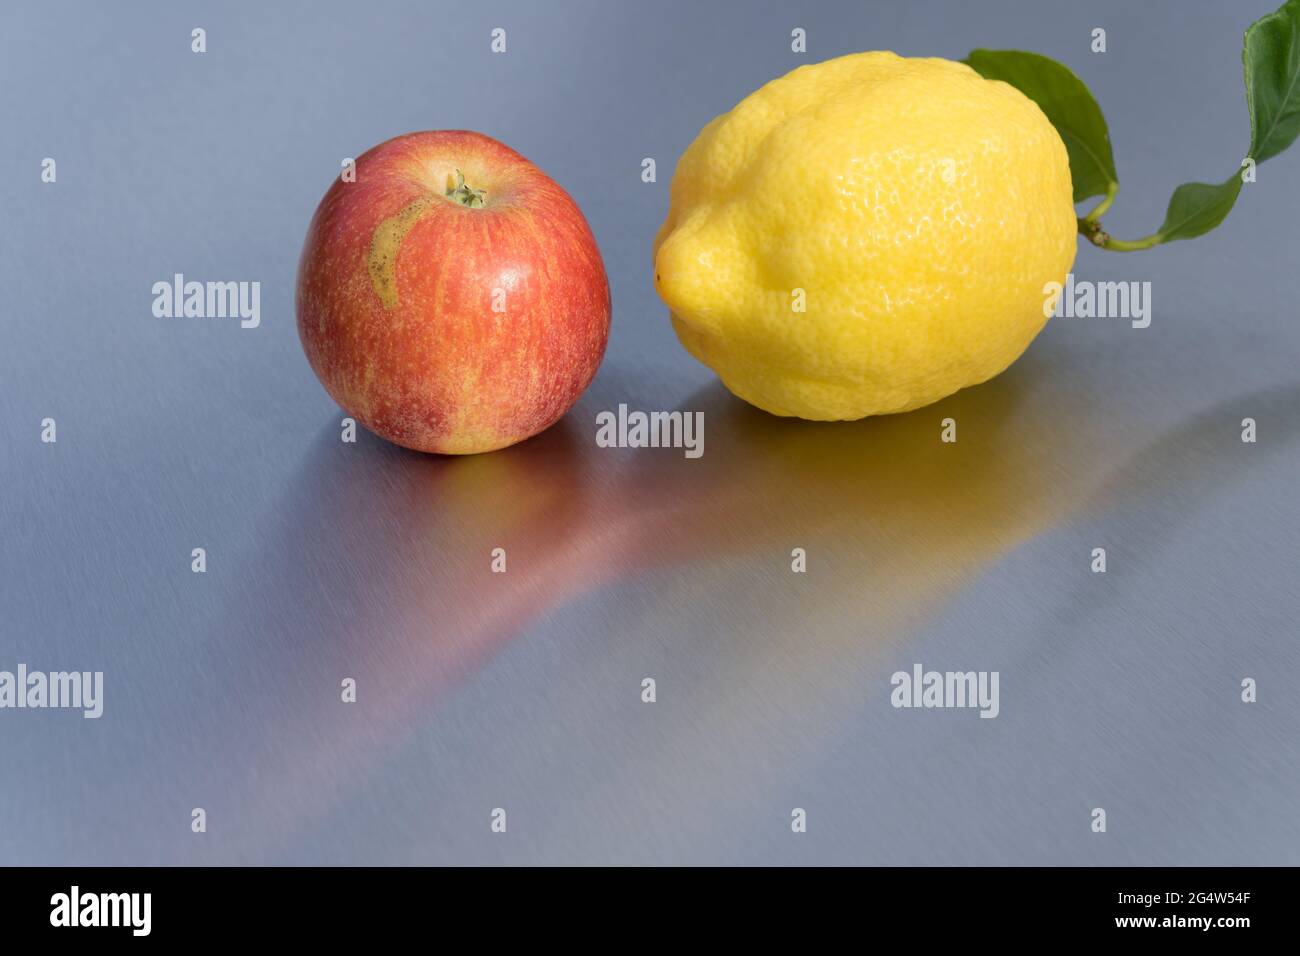 delicious fruits red apple and yellow lemon reflection on clean metallic background Stock Photo